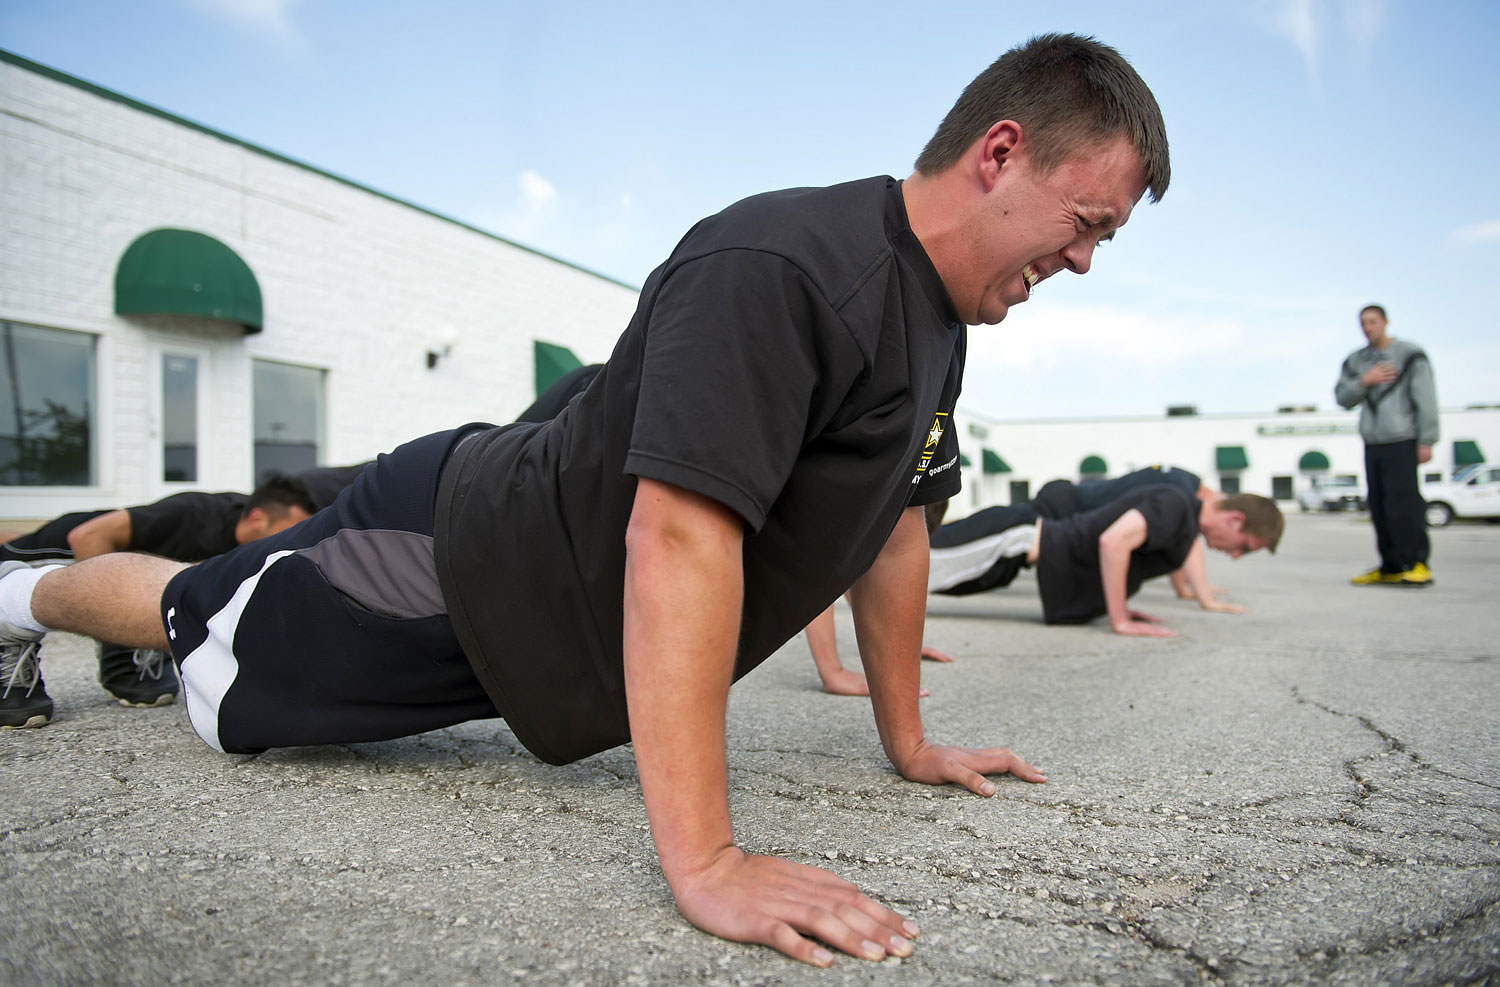 Kyle Bayard, 20, struggles to remain in position during a stationary push-up during physical exercise in the parking lot behind the Army recruiting station in Grandview, Mo., May 6, 2014. (David Eulitt—MCT/Getty Images)